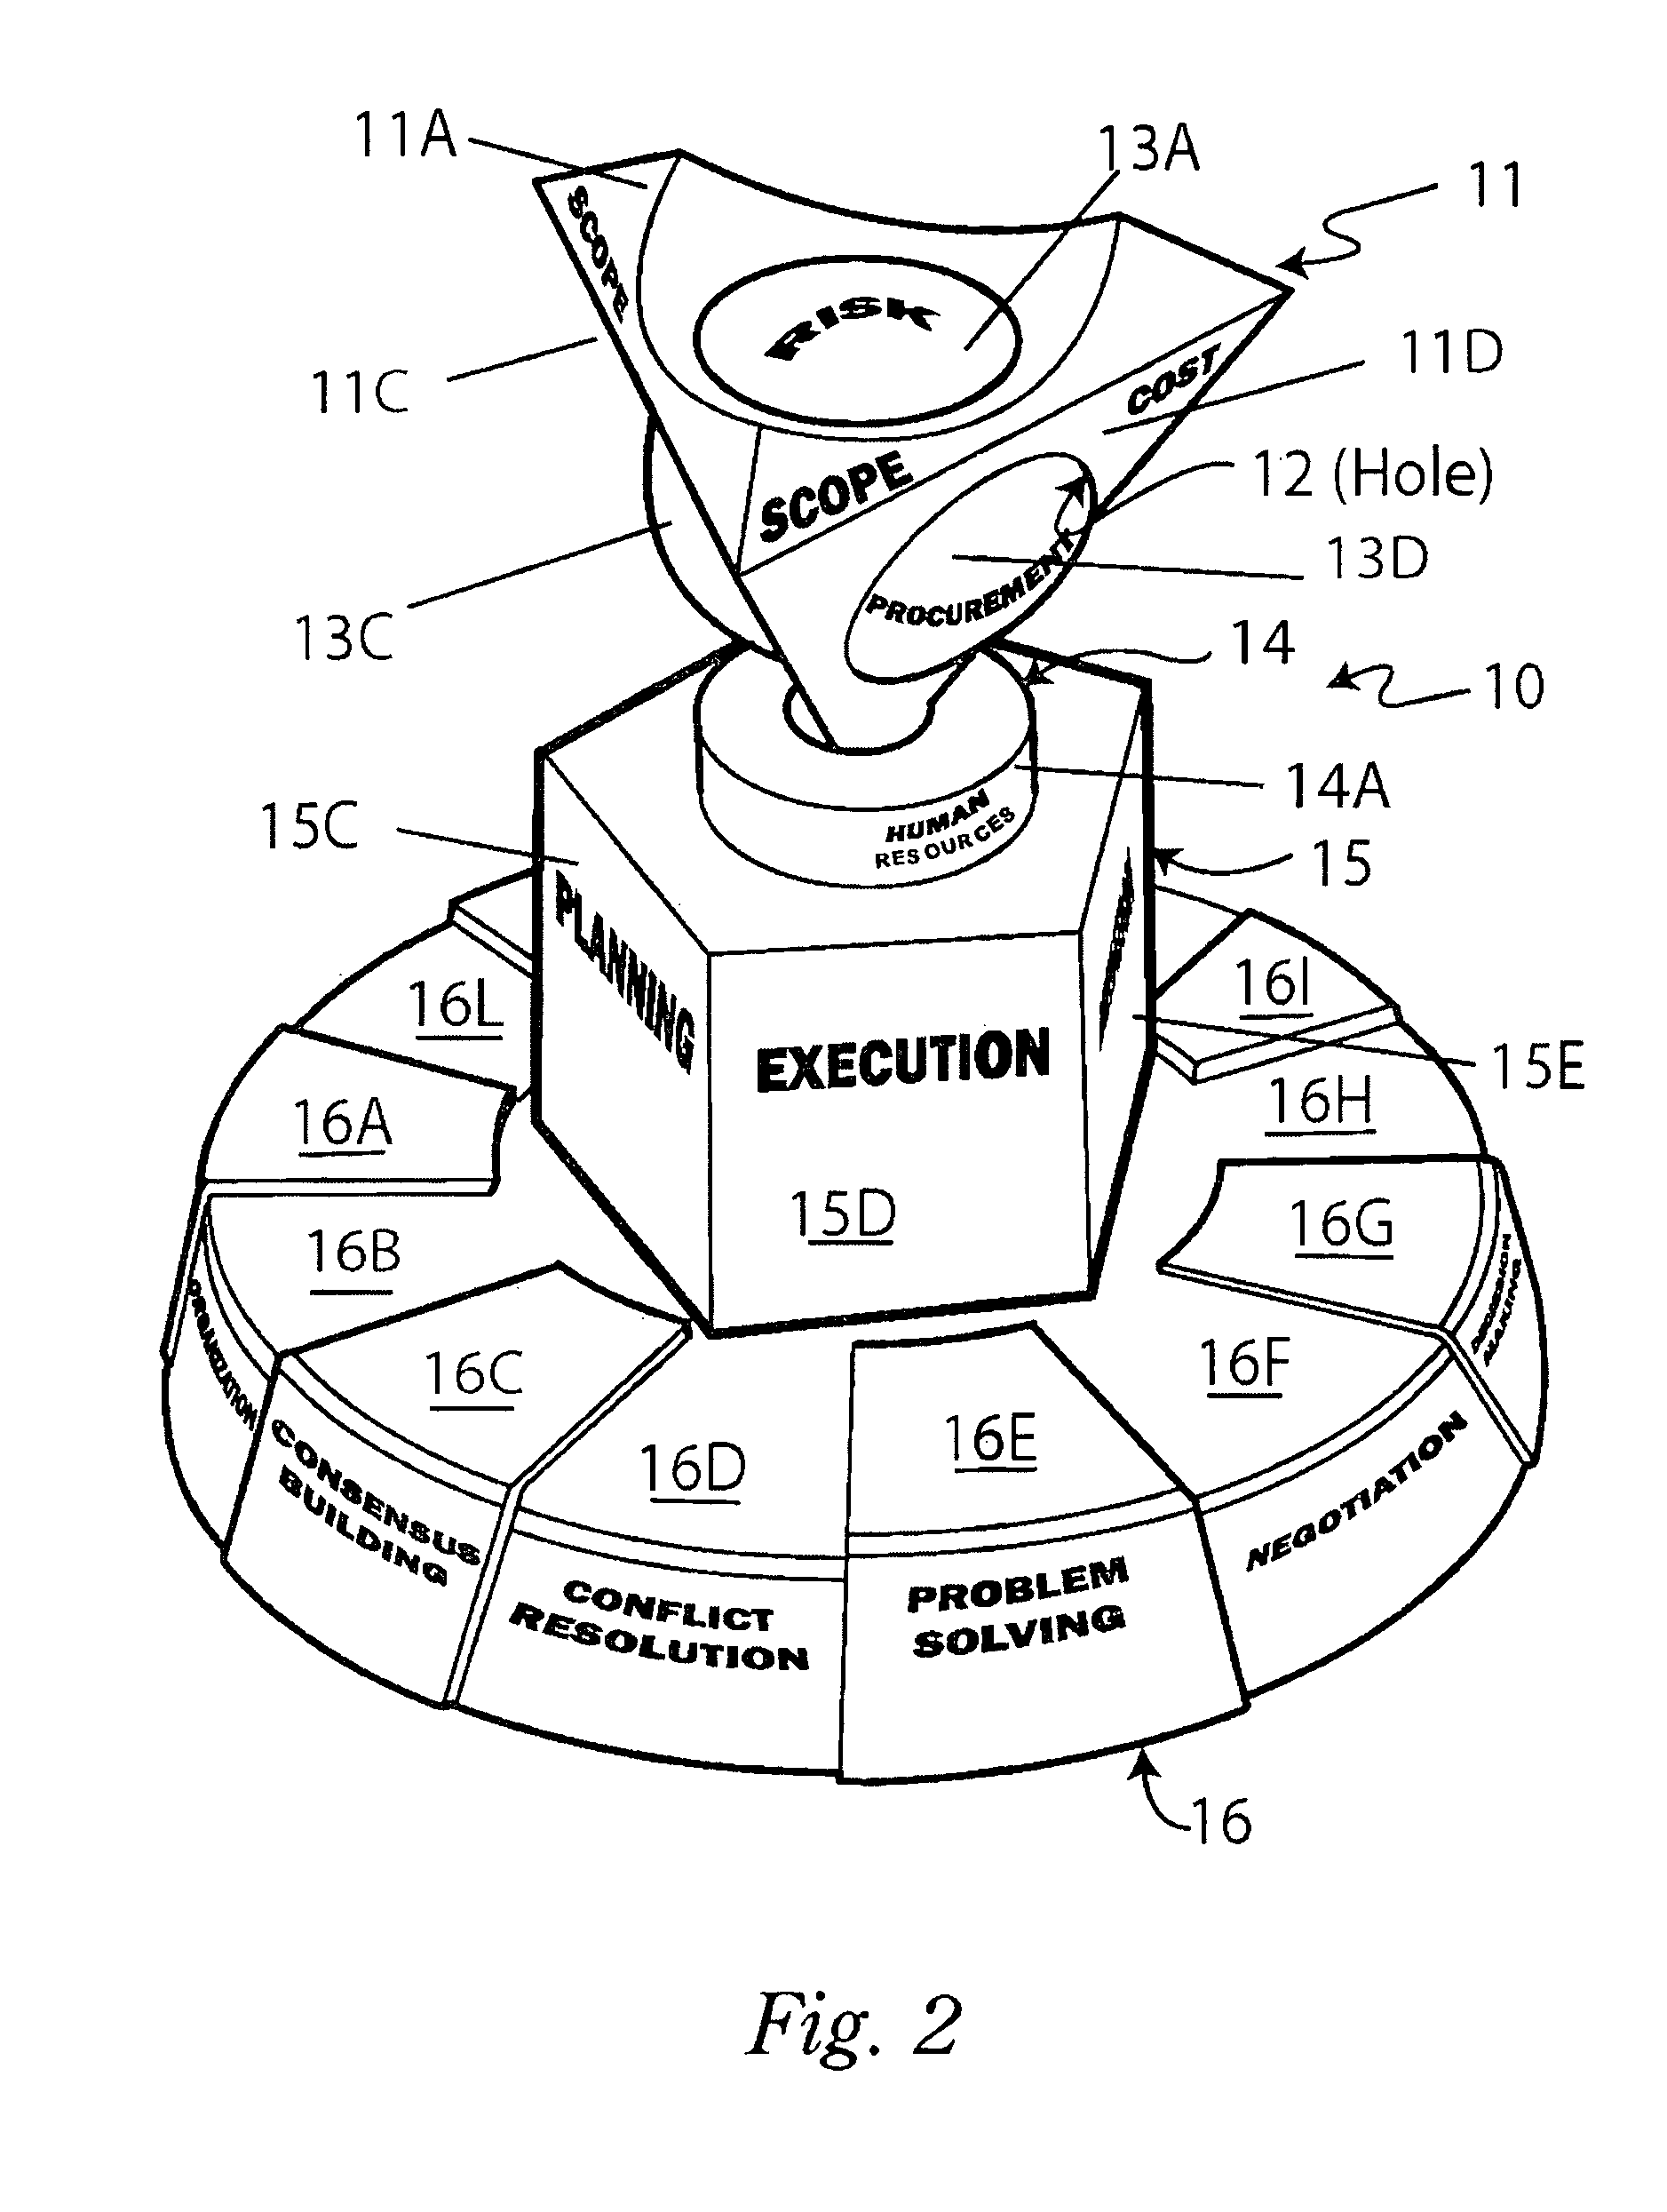 Method and system for arranging and displaying project management intelligence